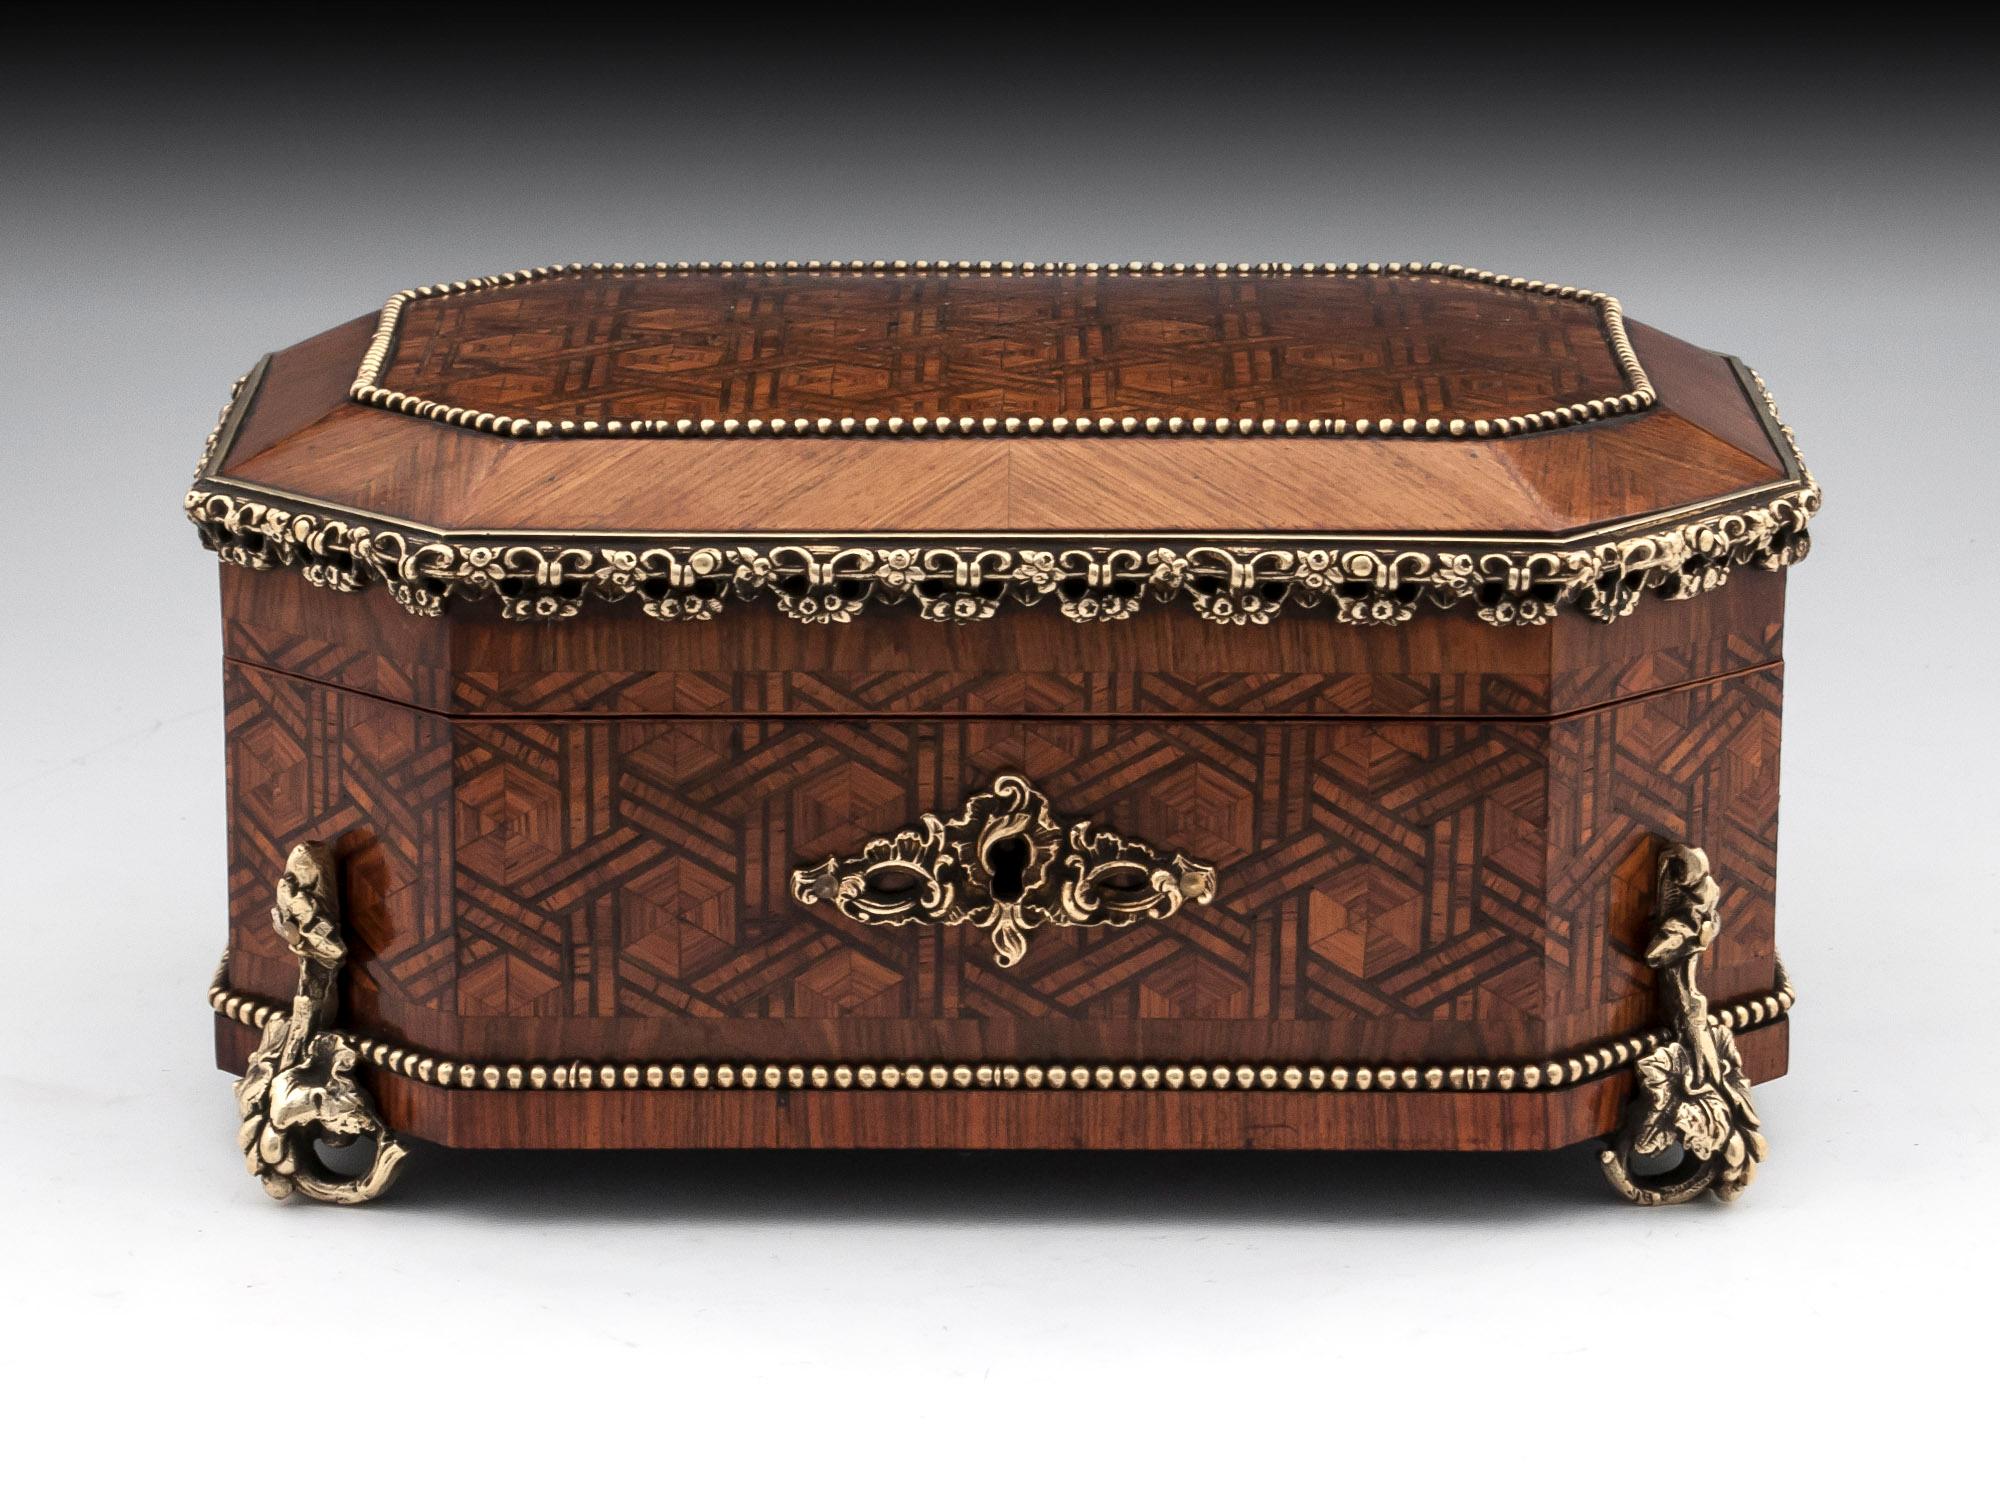 Antique French jewelry box by Tahan, its veneered in walnut with beautiful bronze mounts with ornate feet and escutcheon. 

The interior of this exquisite French jewelry box is lined in a rich maroon velvet and silk paper and features a removable